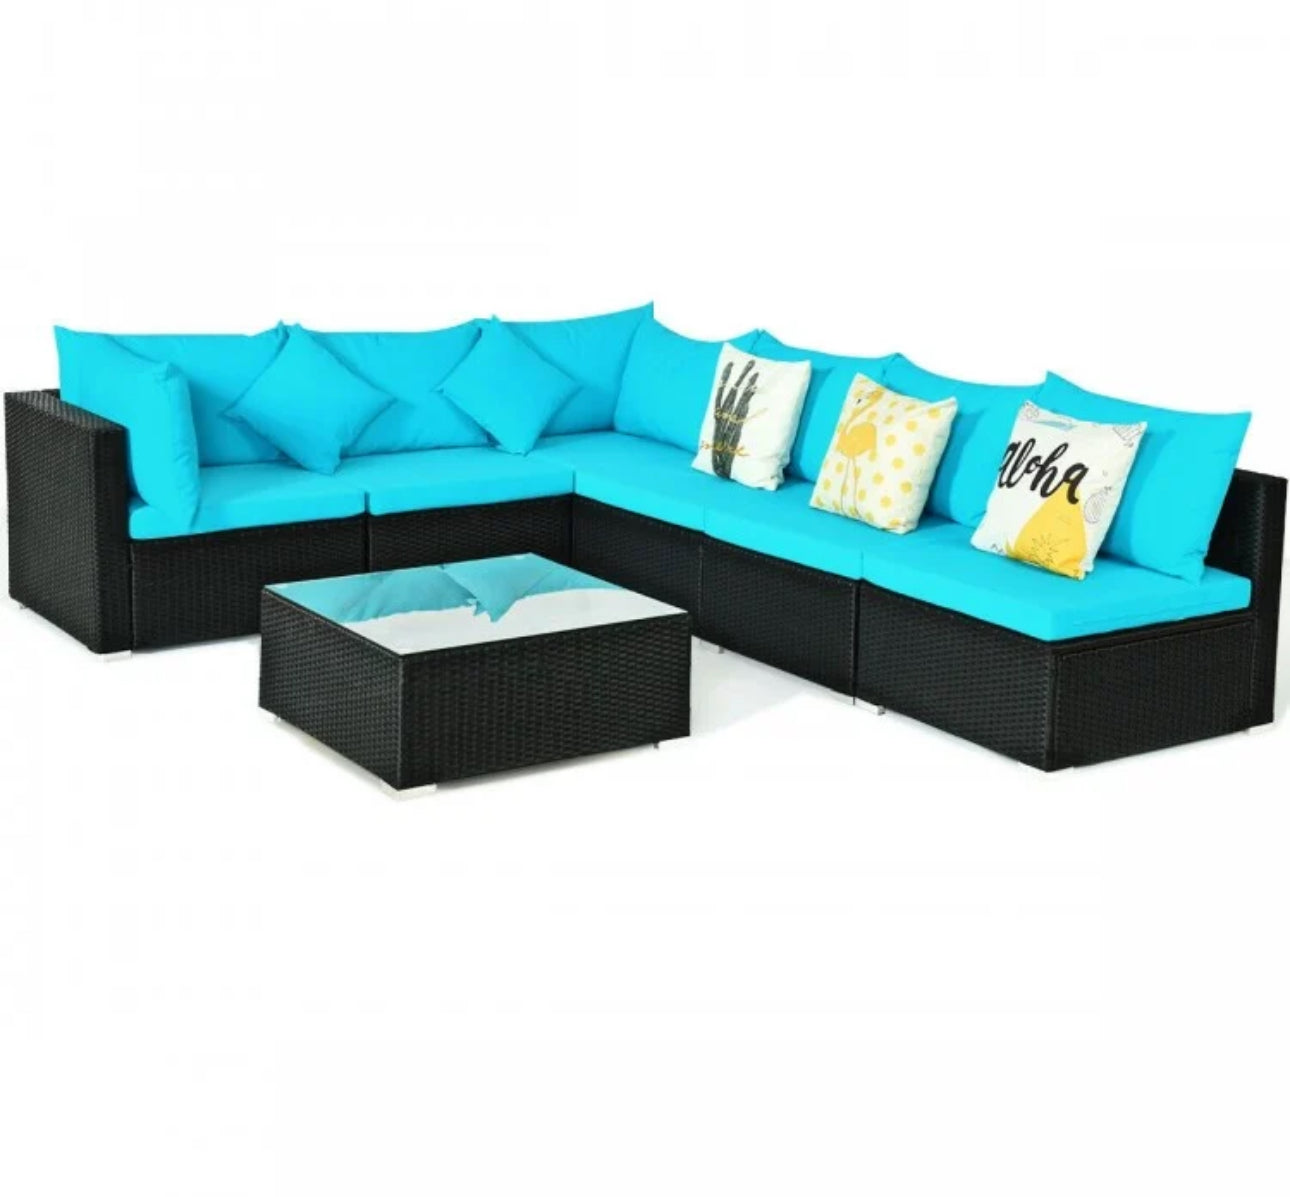 Very Relaxing 7 Piece Patio Furniture Sectional Wicker Sofa Set With Tempered Glass Top